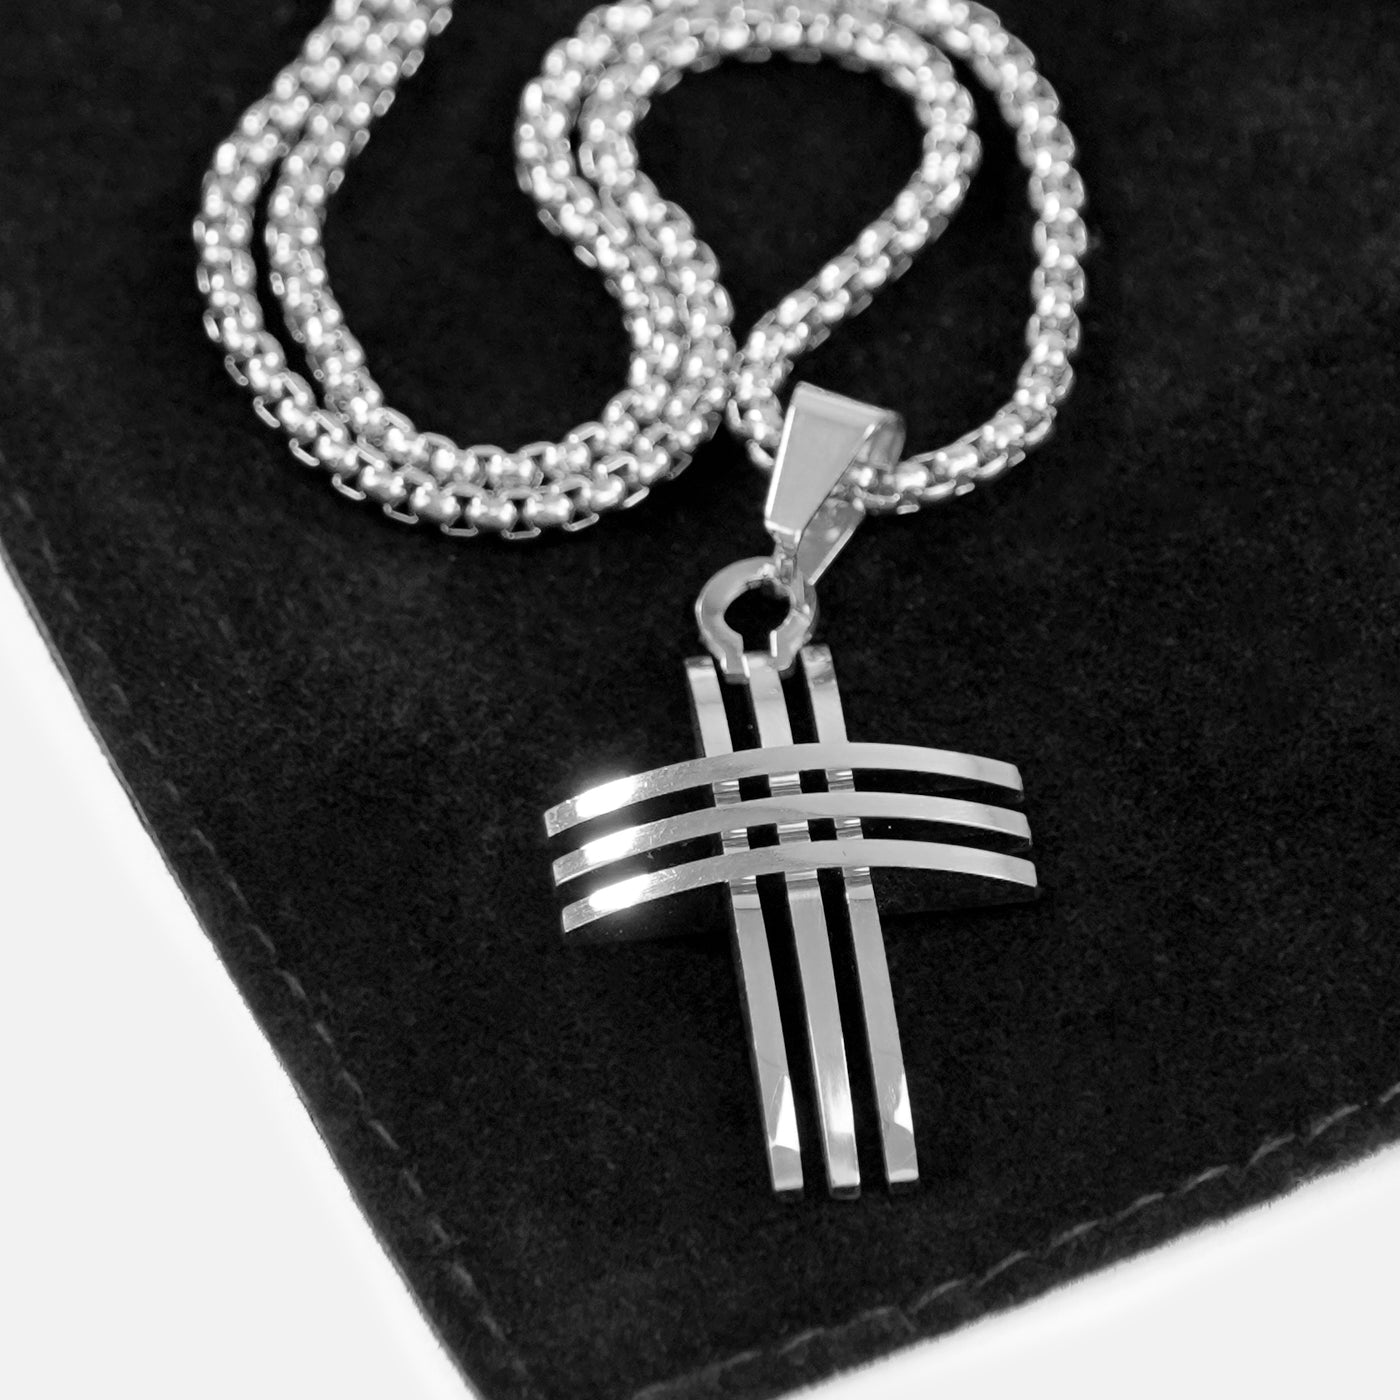 Faith Cross of Blades 1¼" Pendant with Chain Necklace - Stainless Steel